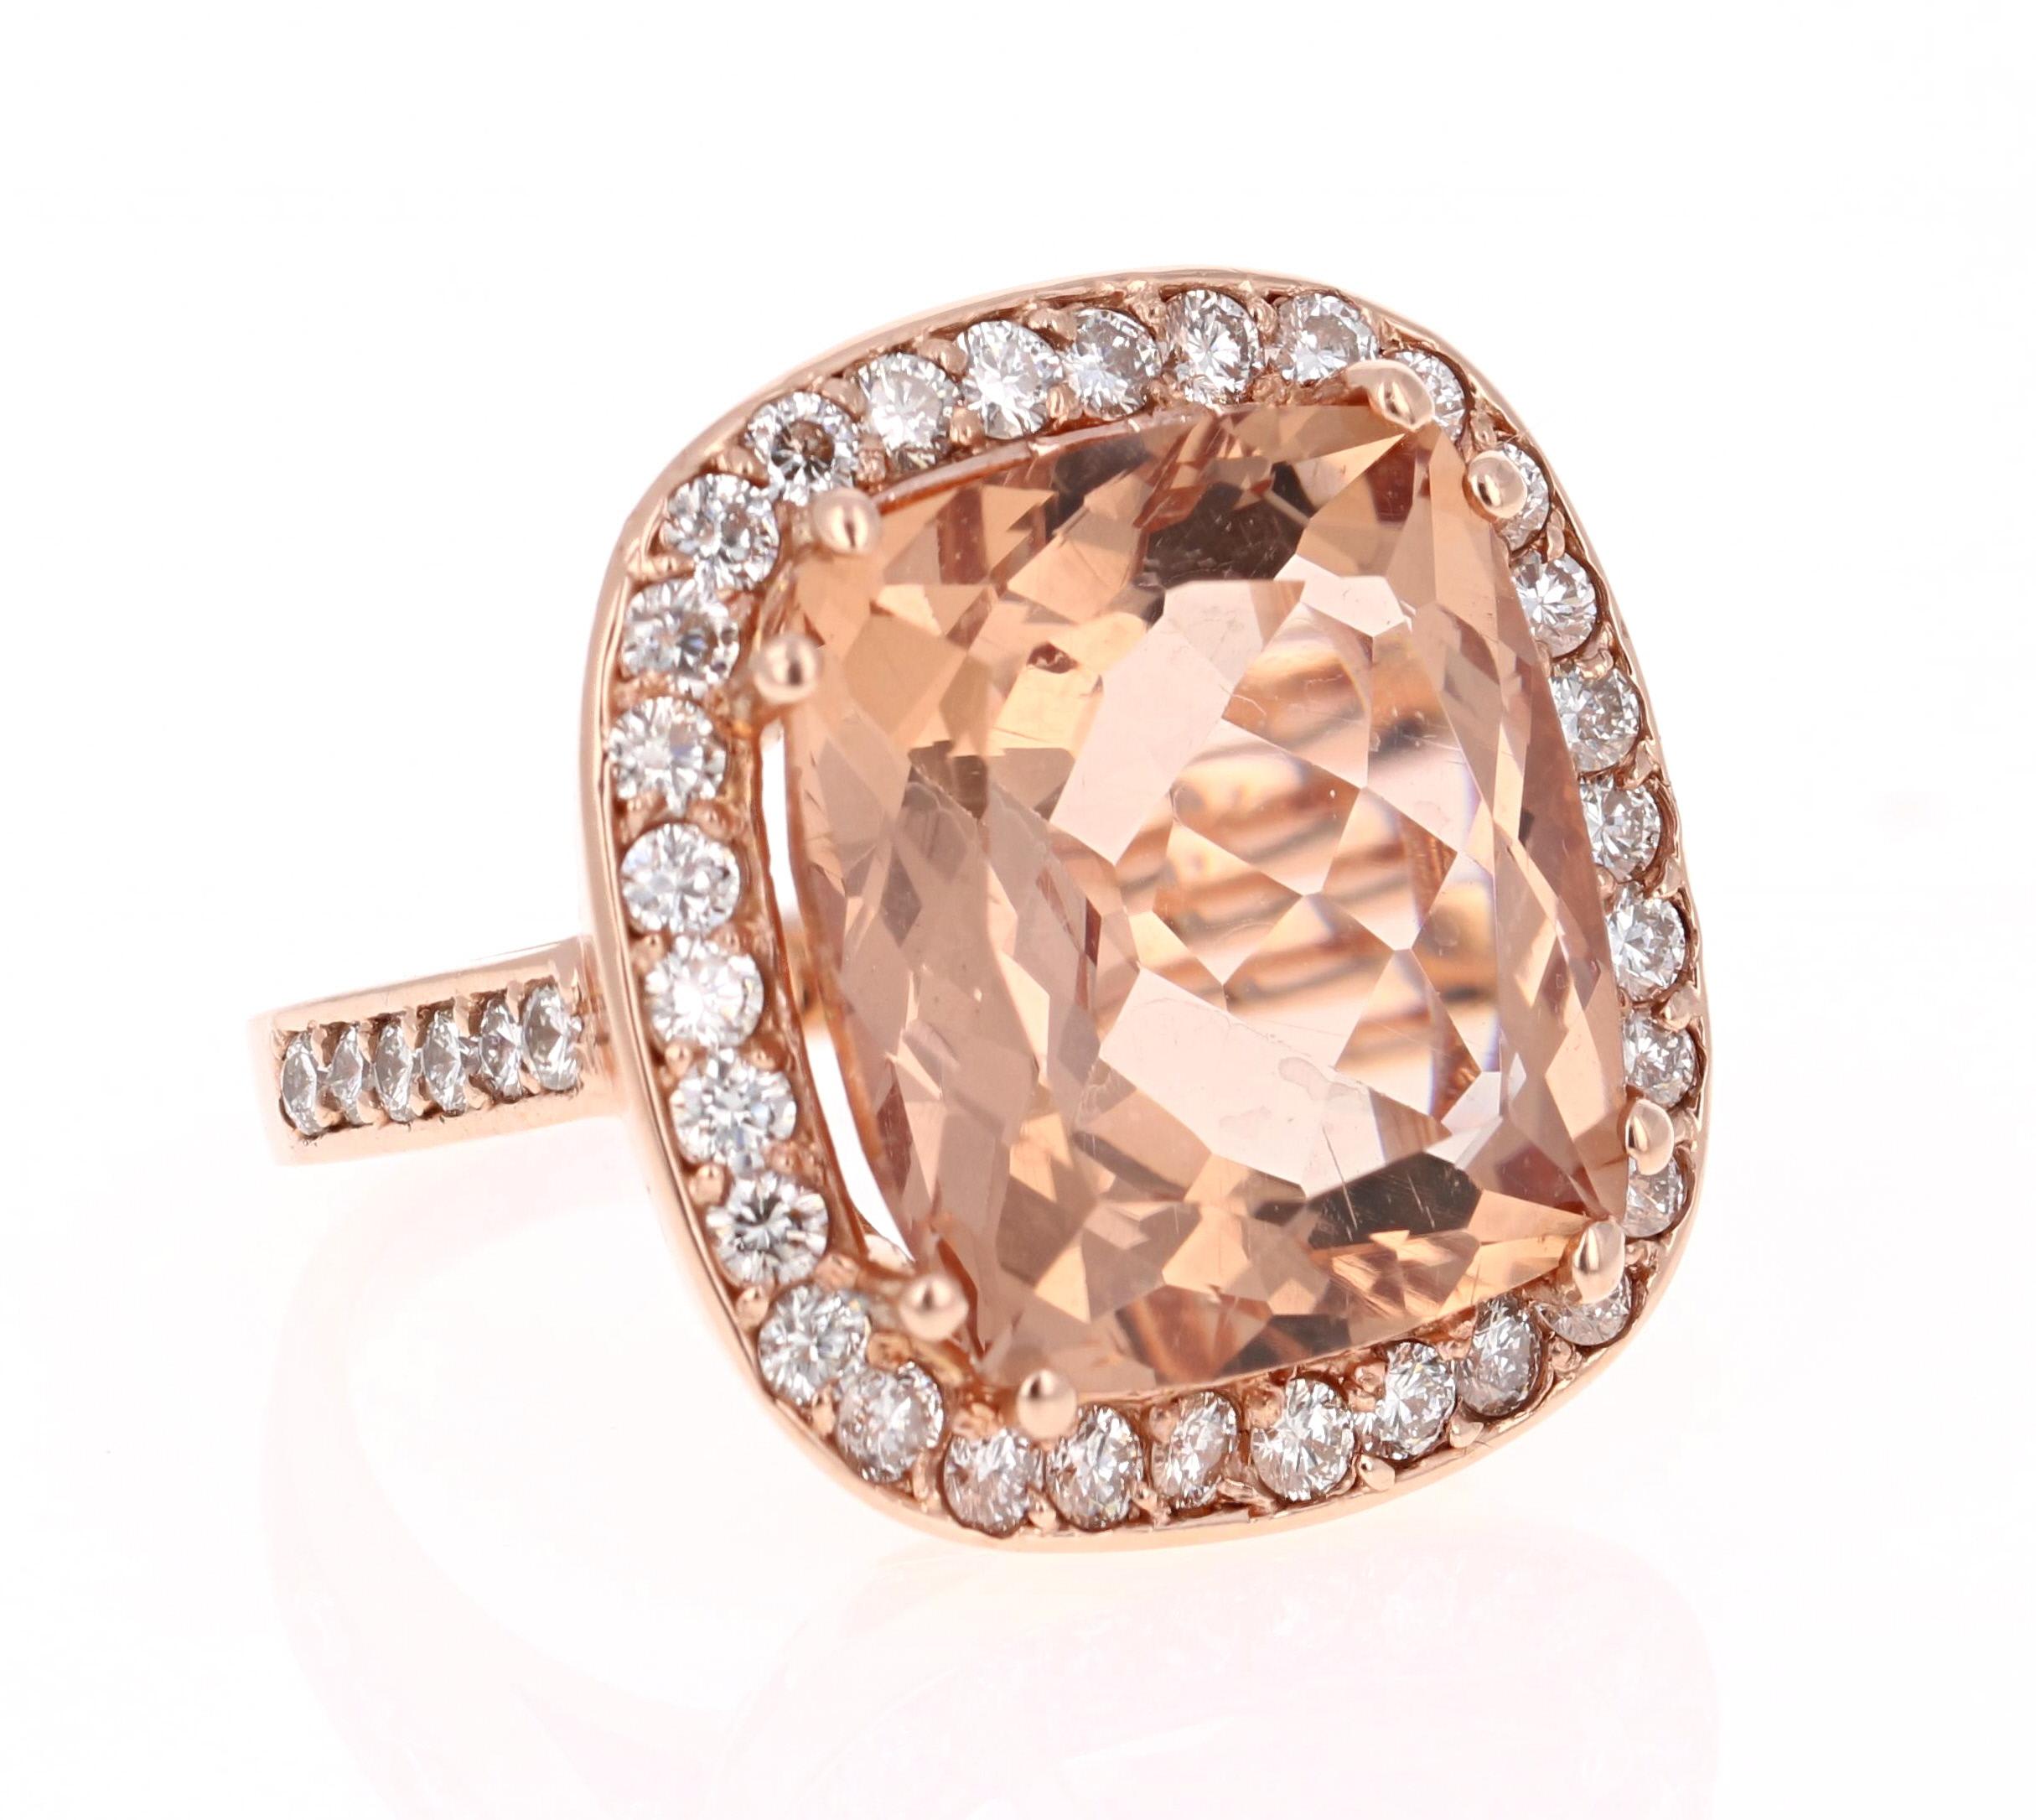 Stunning Statement Morganite & Diamond Ring! 

This Morganite ring has a 14.69 Carat Cushion Cut Morganite and is surrounded by 42 Round Cut Diamonds that weigh 1.52 Carats. Clarity: VS, Color: H. The total carat weight of the ring is 16.21 Carats. 